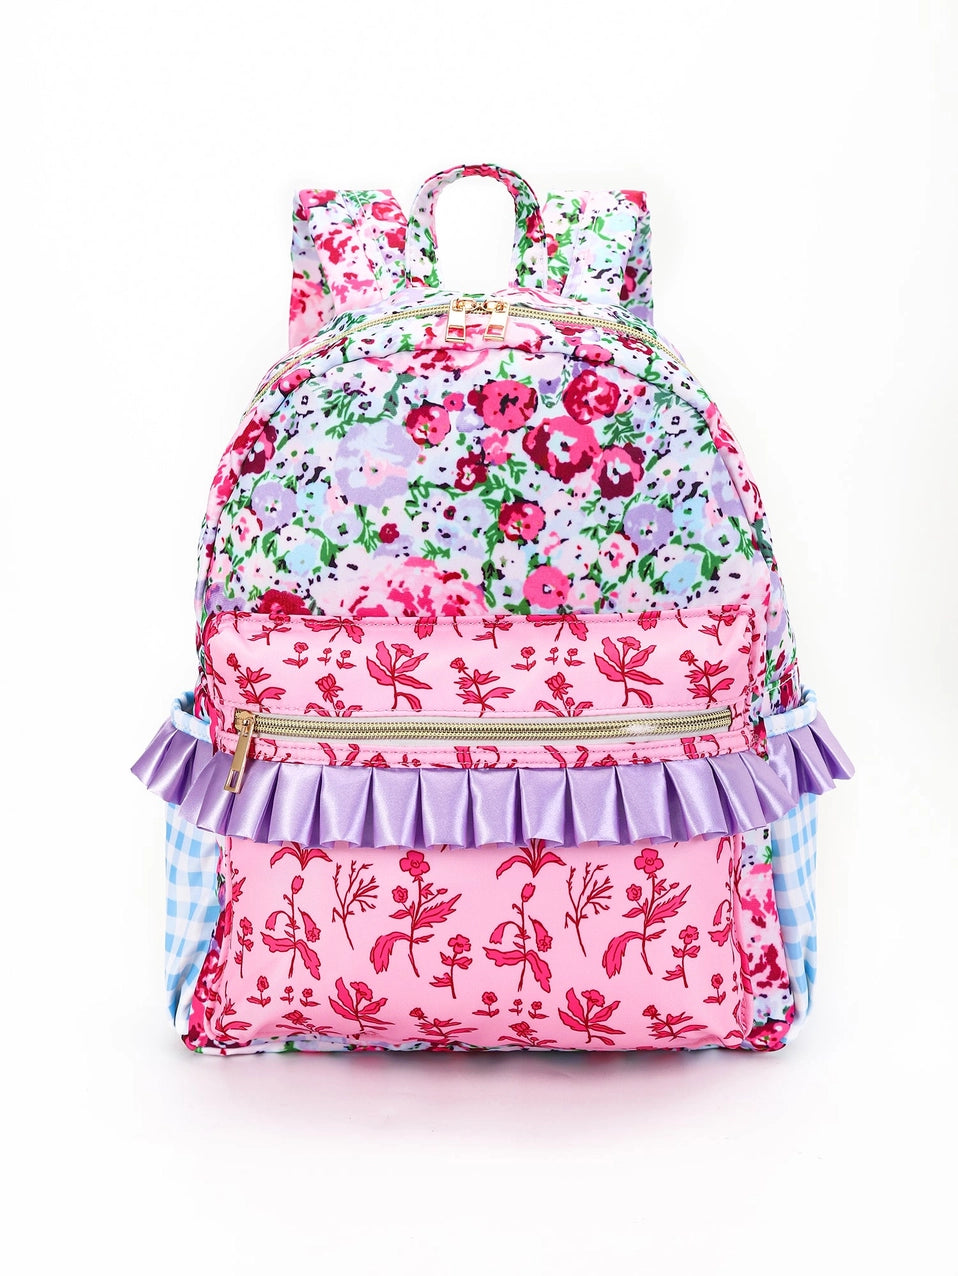 Lily Floral Ruffle Kids Backpack - Hot Pink